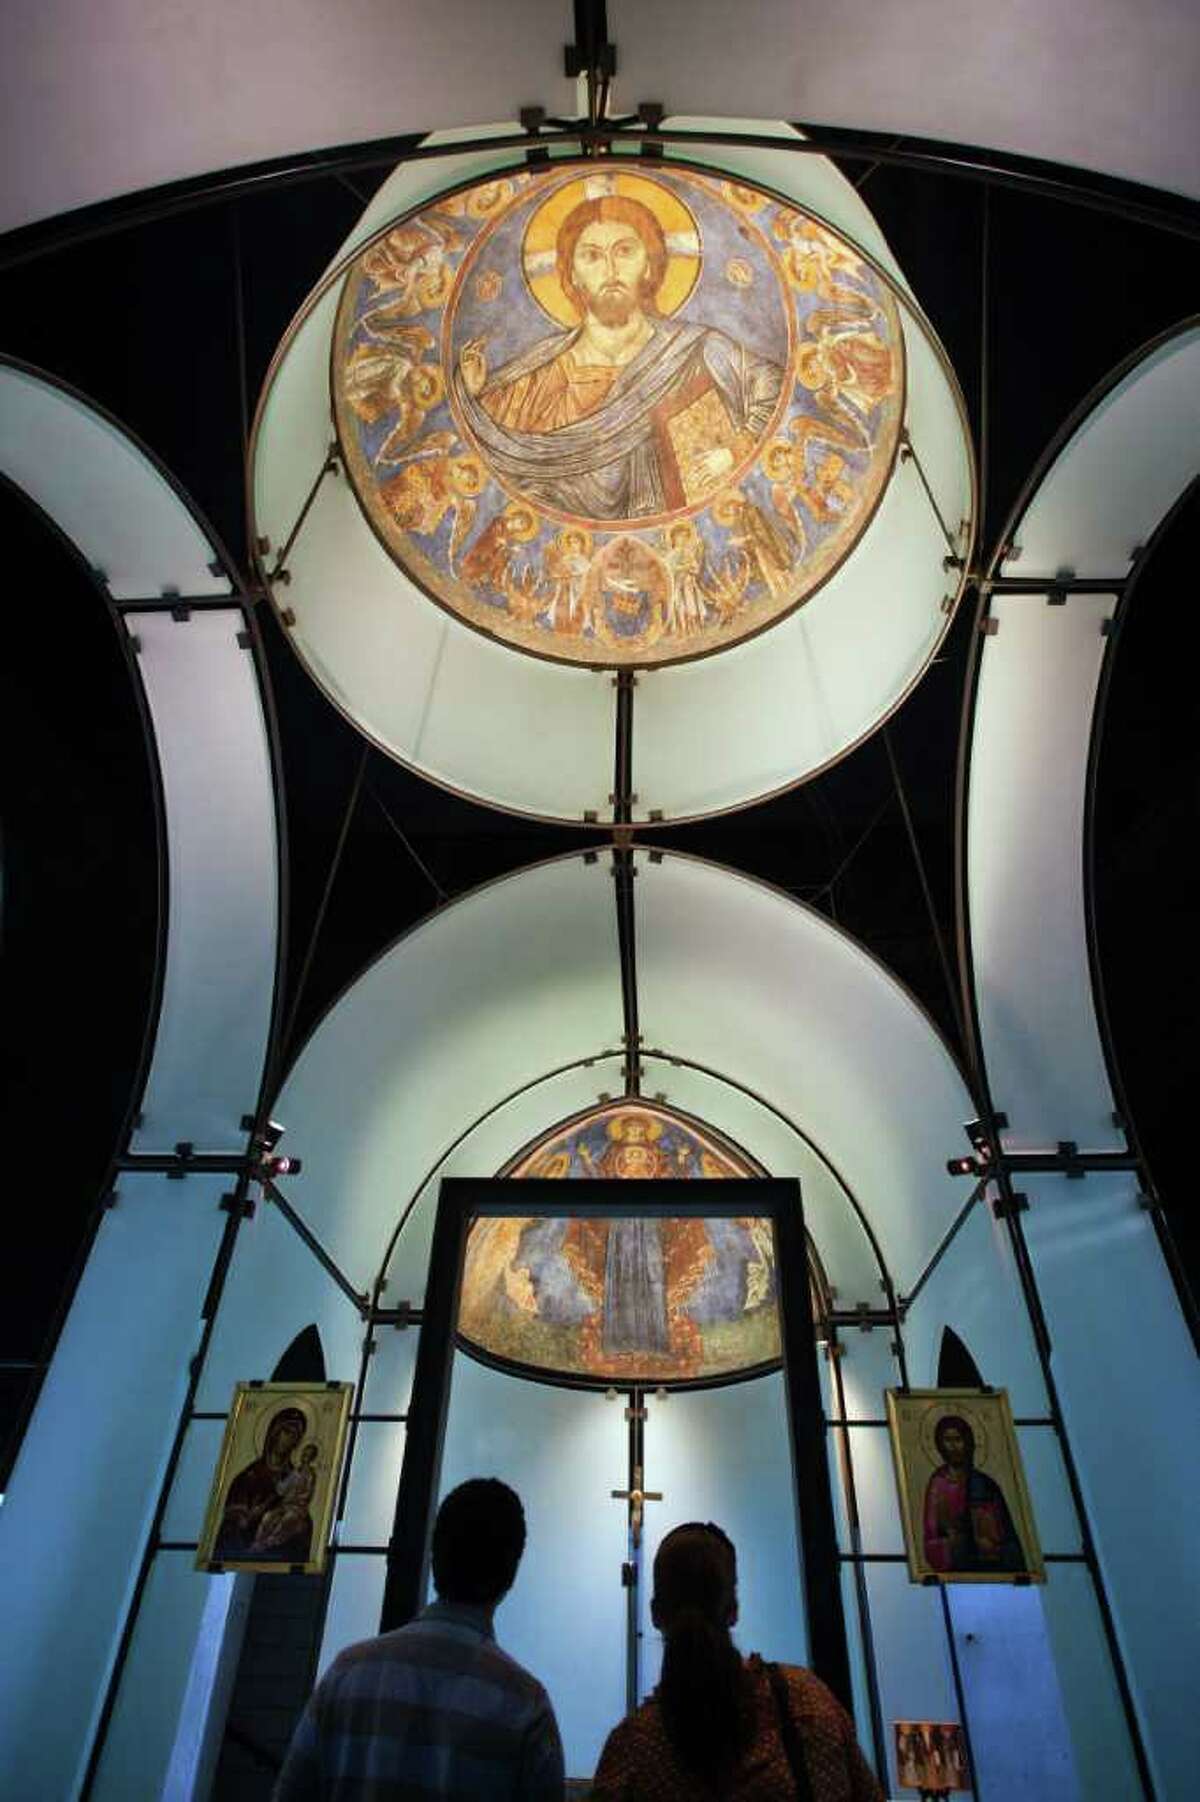 The Lysi dome, top, and a fresco showing the Virgin, flanked by archangels Gabirel and Michael, bottom, are seen in the Byzantine Fresco Chapel on Friday, Sept. 23, 2011, in Houston. For more than two decades Houston has been home to a restored pair of large 13th-century Byzantine frescoes that Menil Collection founder Dominique de Menil purchased from art thieves in 1984. Now the Menil is working to return them to their rightful owner, the Holy Archbishopric of Cyprus. While the move seemingly recalls recent decisions by New York's Metropolitan Museum of Art and others to return priceless artworks that improperly left their countries of origin, there's a difference: Neither de Menil nor the museum she founded ever claimed to own the frescoes. ( Smiley N. Pool / Houston Chronicle )